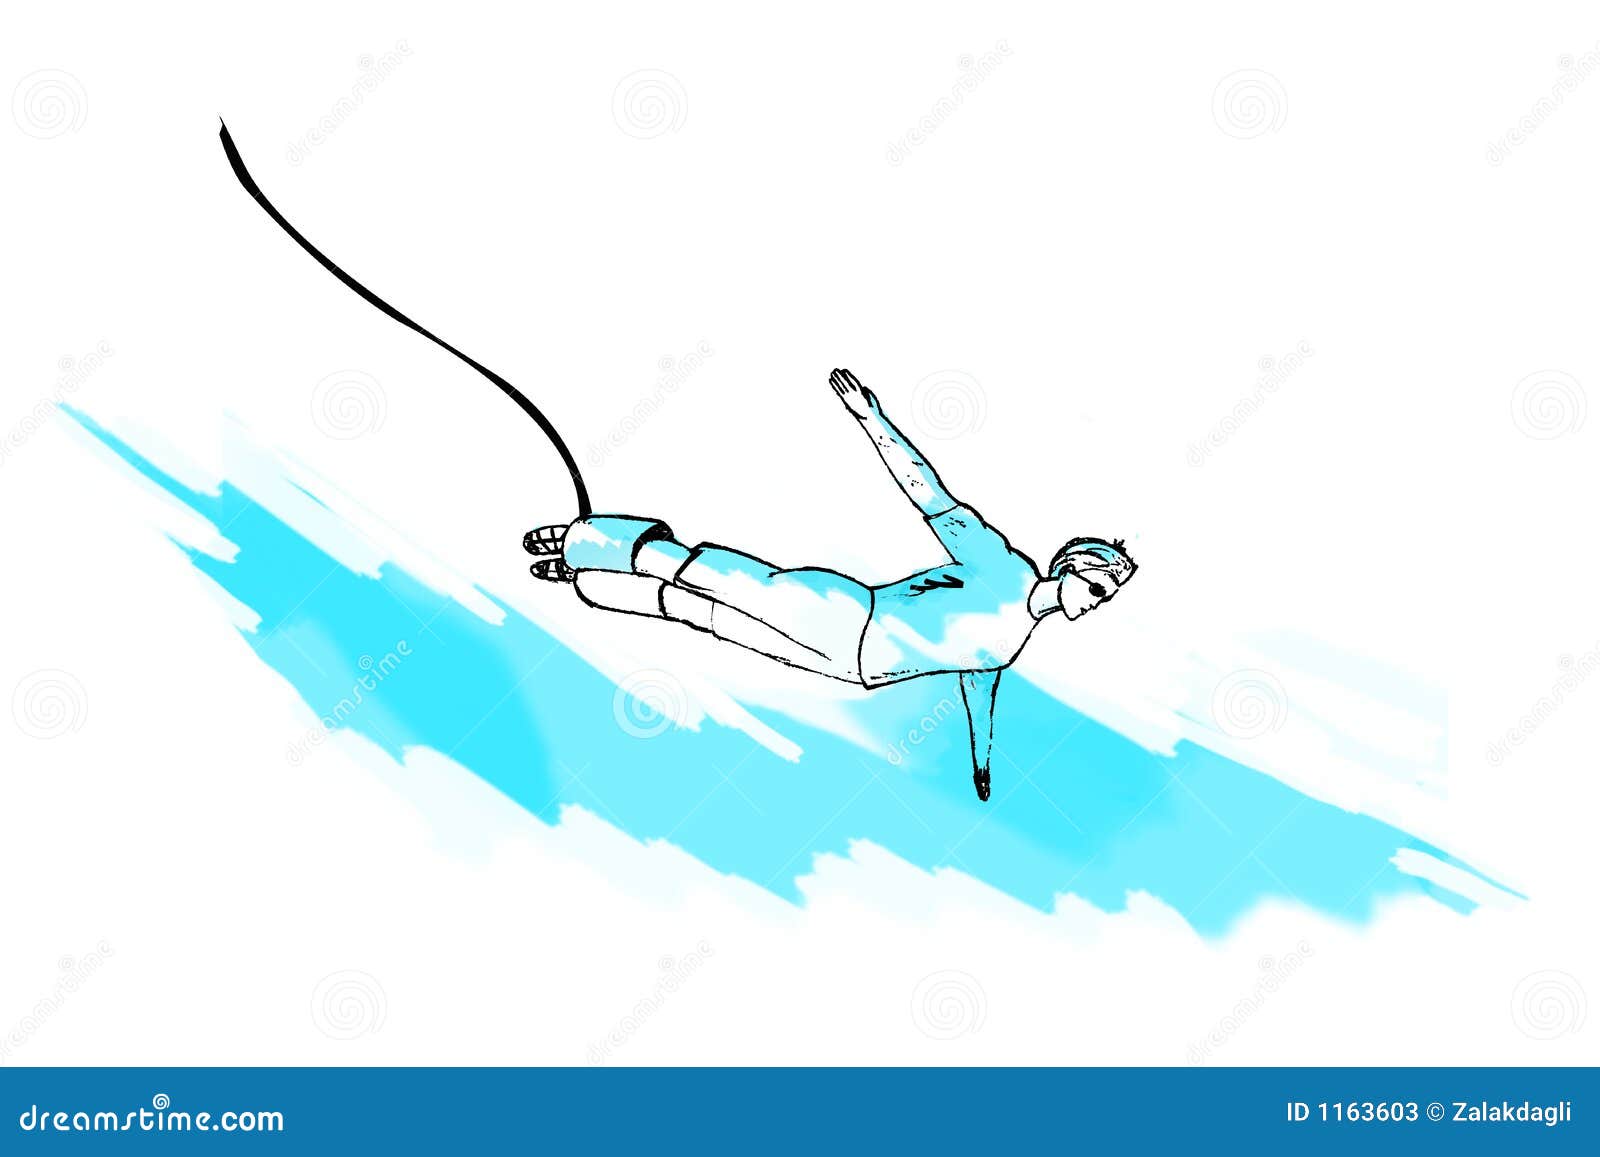 clipart bungee jumping - photo #37